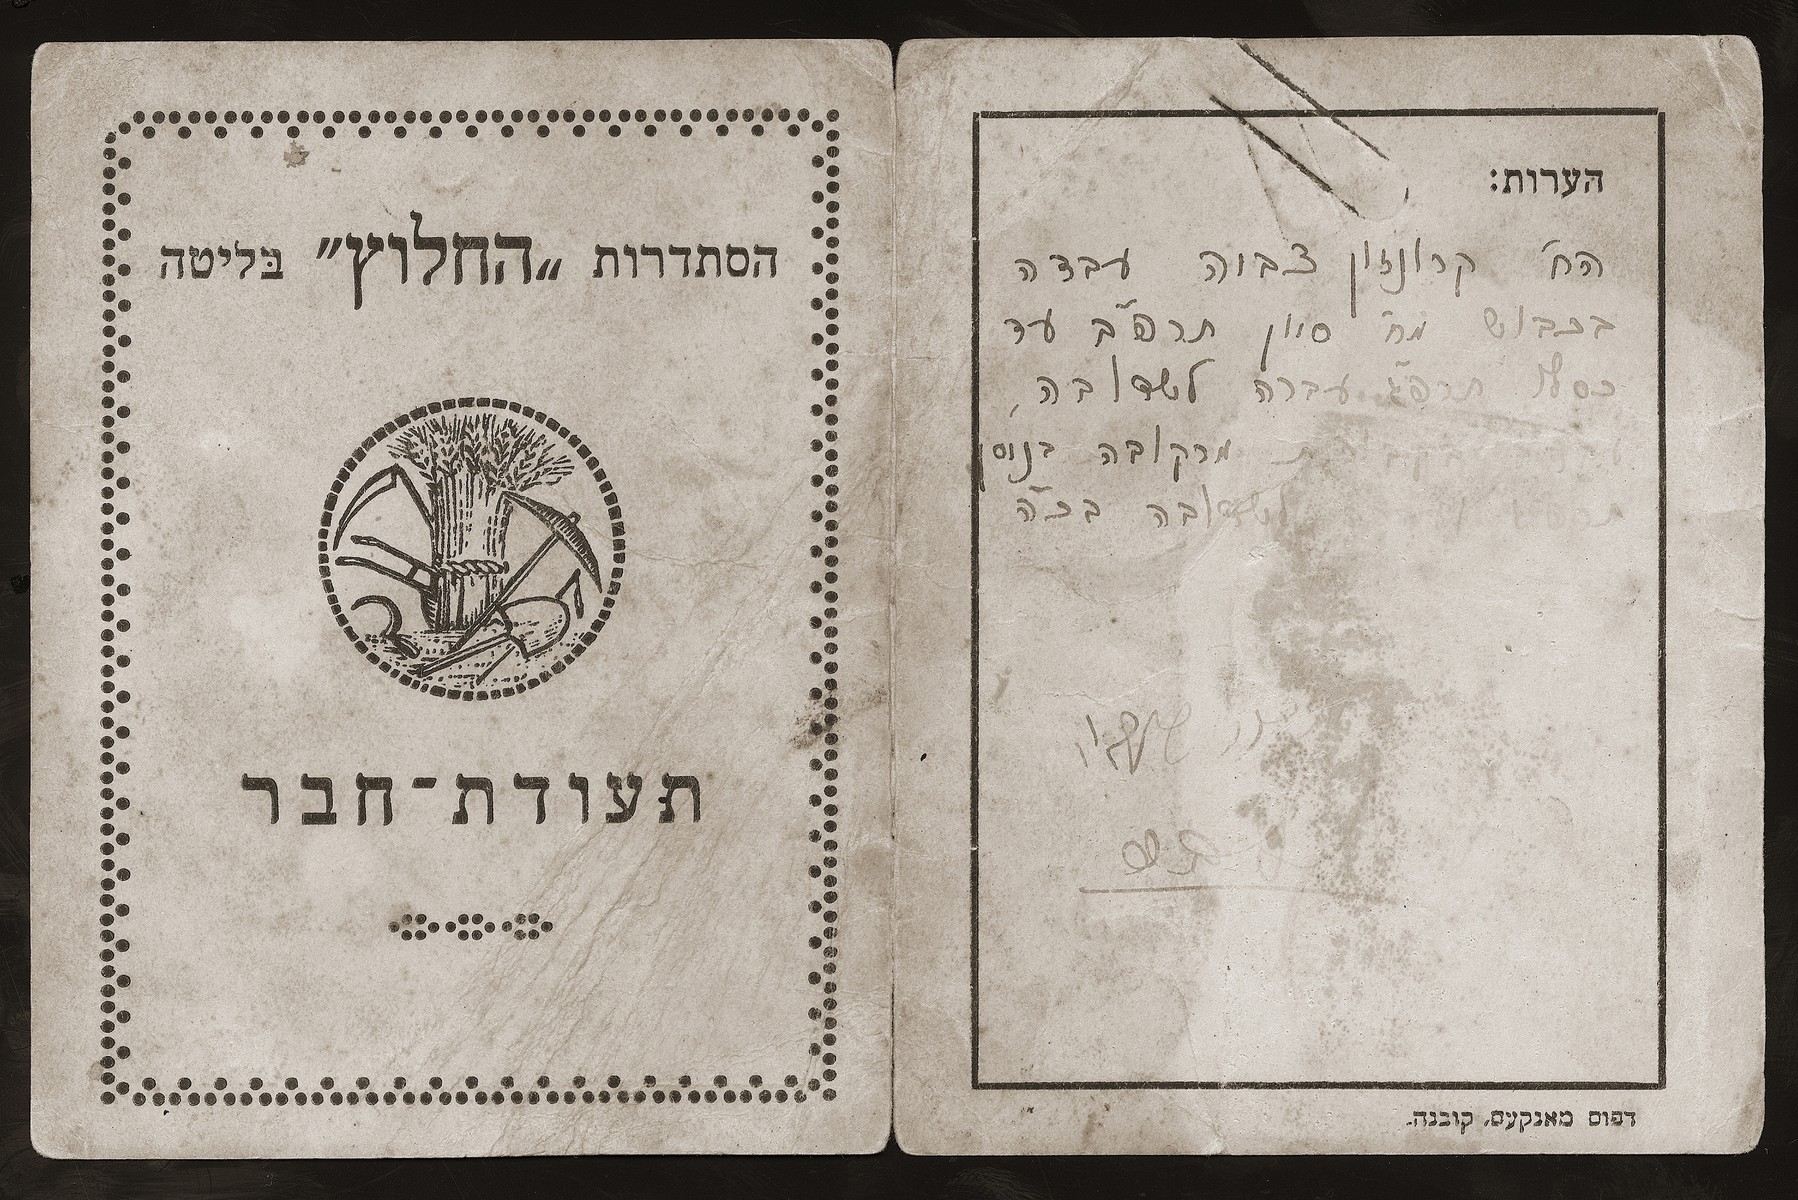 "Hehalutz" membership card issued to Zvia Kronsohn (Lederman) in Kovno. 

HeHalutz was an association of Jewish youth movements founded at the turn of the century to train its members in manual labor, usually agriculture,  in preparation for immigration to Palestine.  

In Lithuania, HeHalutz was established after World War I, and membership ranged betwen 1,000 and 1,500 youth. Kibbutzim were established in several towns including Kovno, Shavli, Poniviez and Memel.  Originally these cooperative societies trained workers in carpentry, tailoring and other crafts.  Later, the focus shifted to primarily agricultural work.